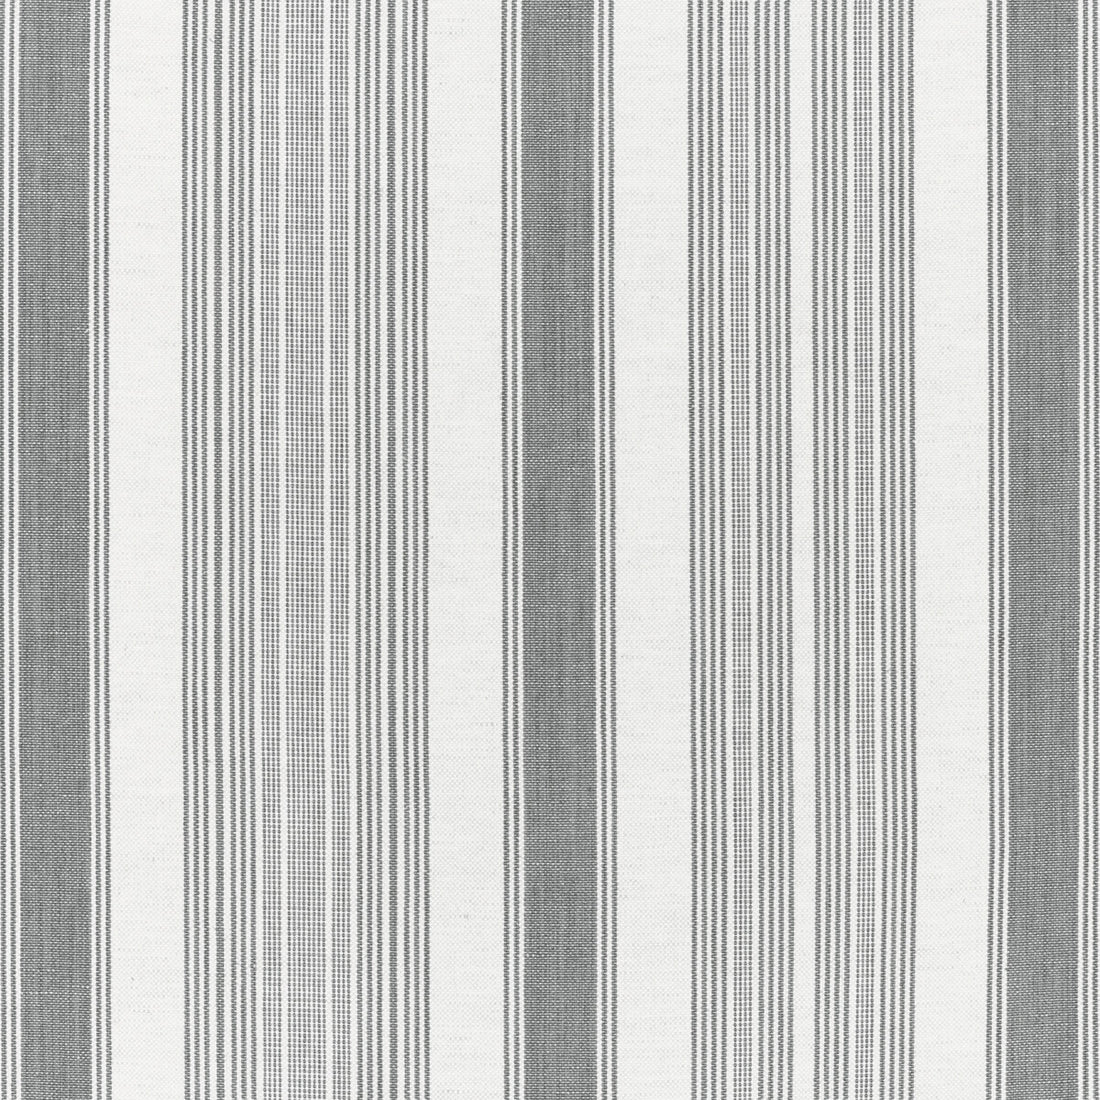 Tablada Stripe fabric in smoke color - pattern 2021102.1101.0 - by Lee Jofa in the Triana Weaves collection